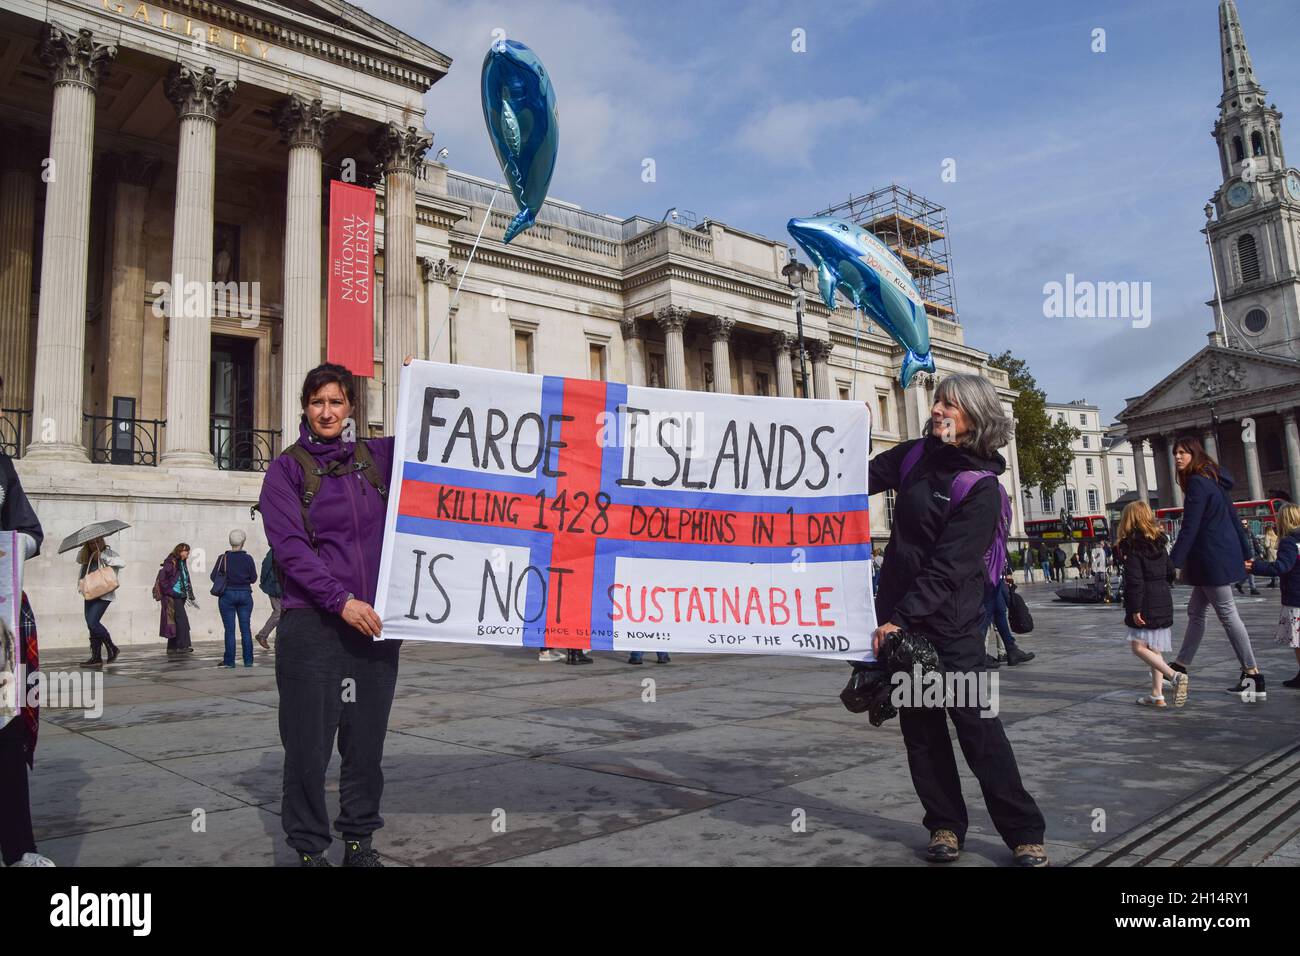 London, UK. 16th October 2021. Protesters in Trafalgar Square. Sea Shepherd and other activists marched through Westminster, calling for an end to the slaughter of dolphins in Faroe Islands and Taiji, Japan. Credit: Vuk Valcic / Alamy Live News Stock Photo